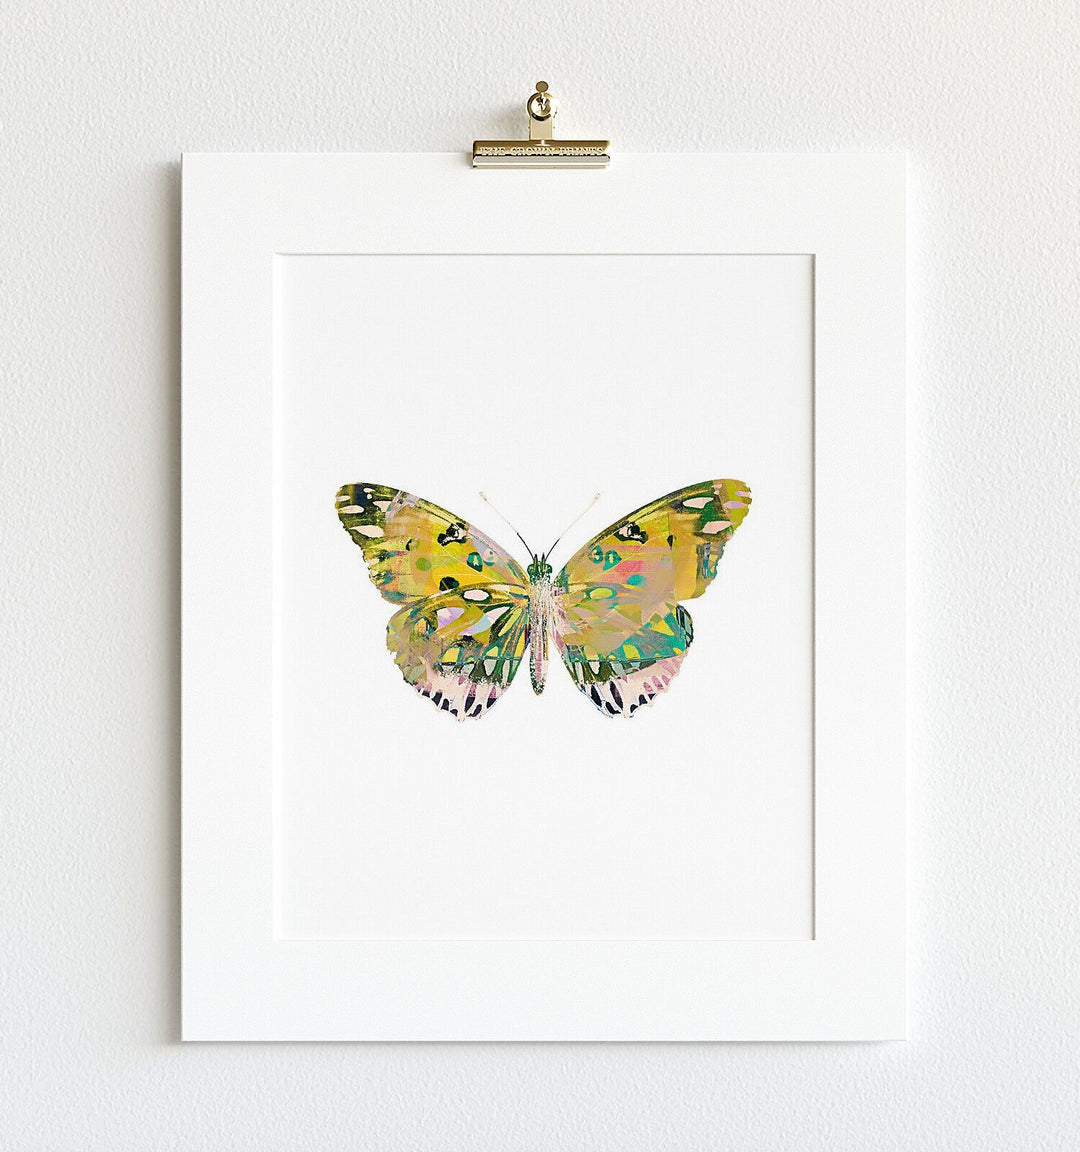 Butterfly No. 4